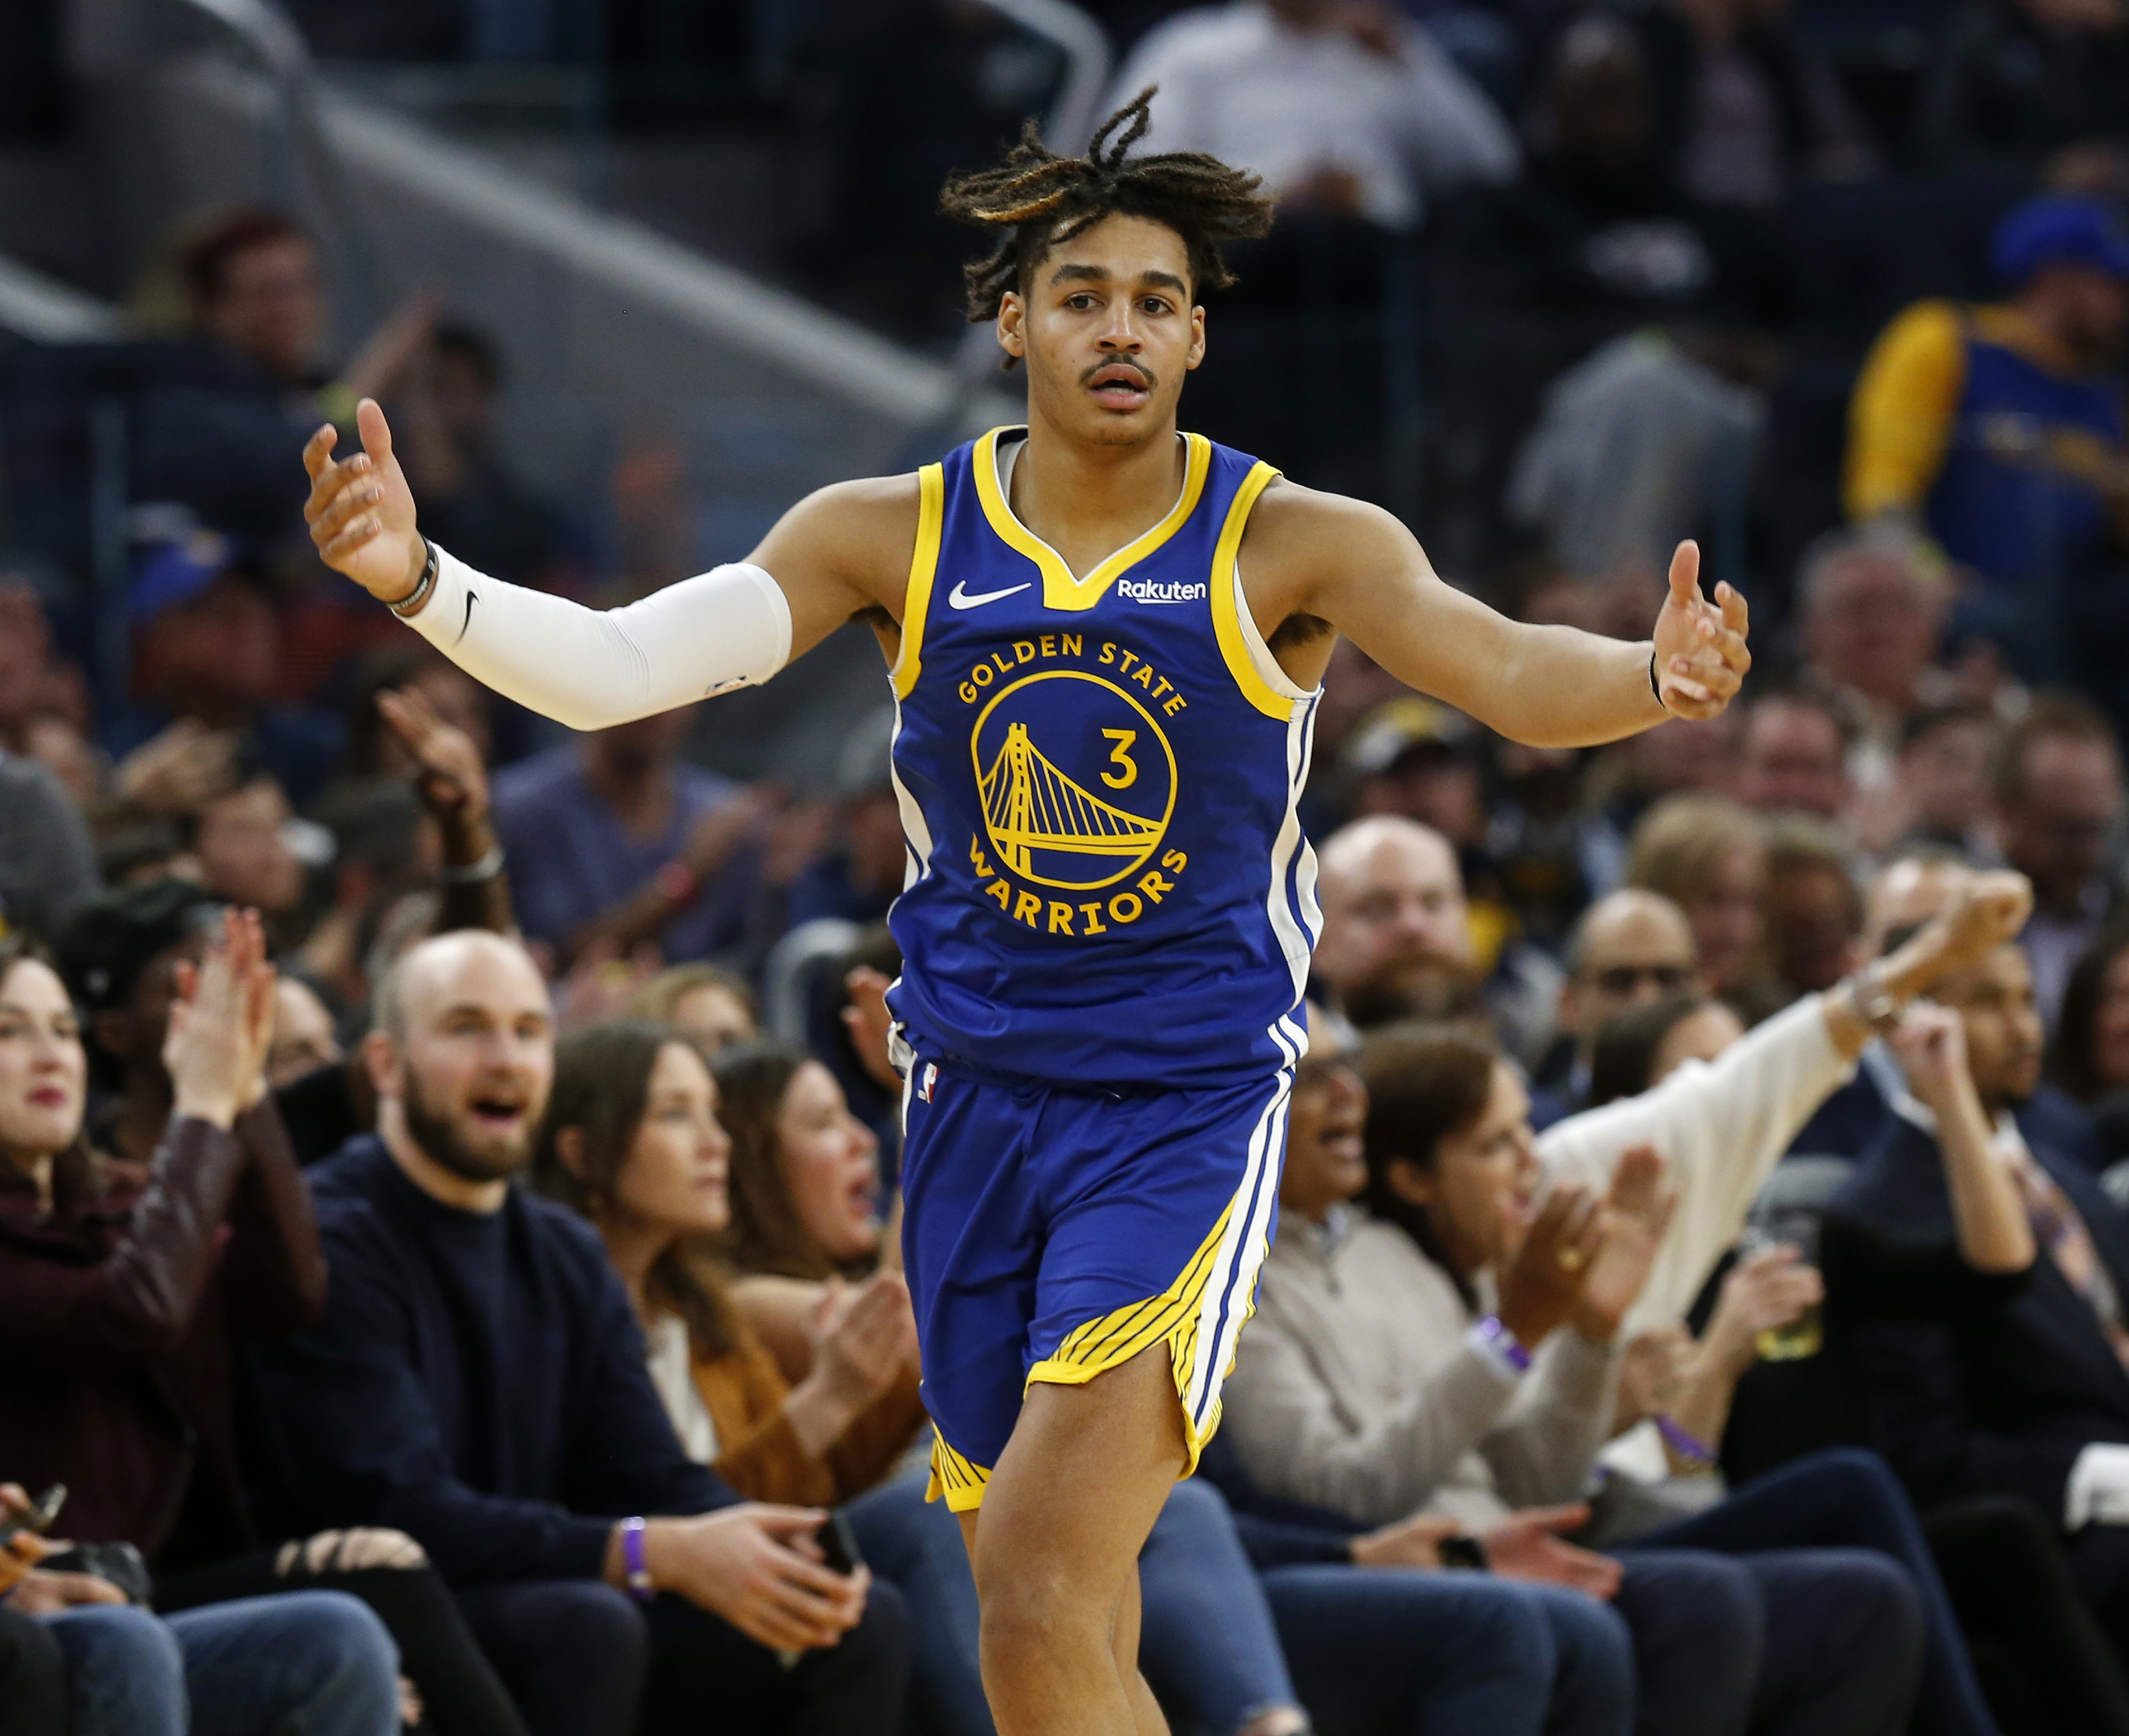 Golden State Warriors: Jordan Poole was not ready for prime time